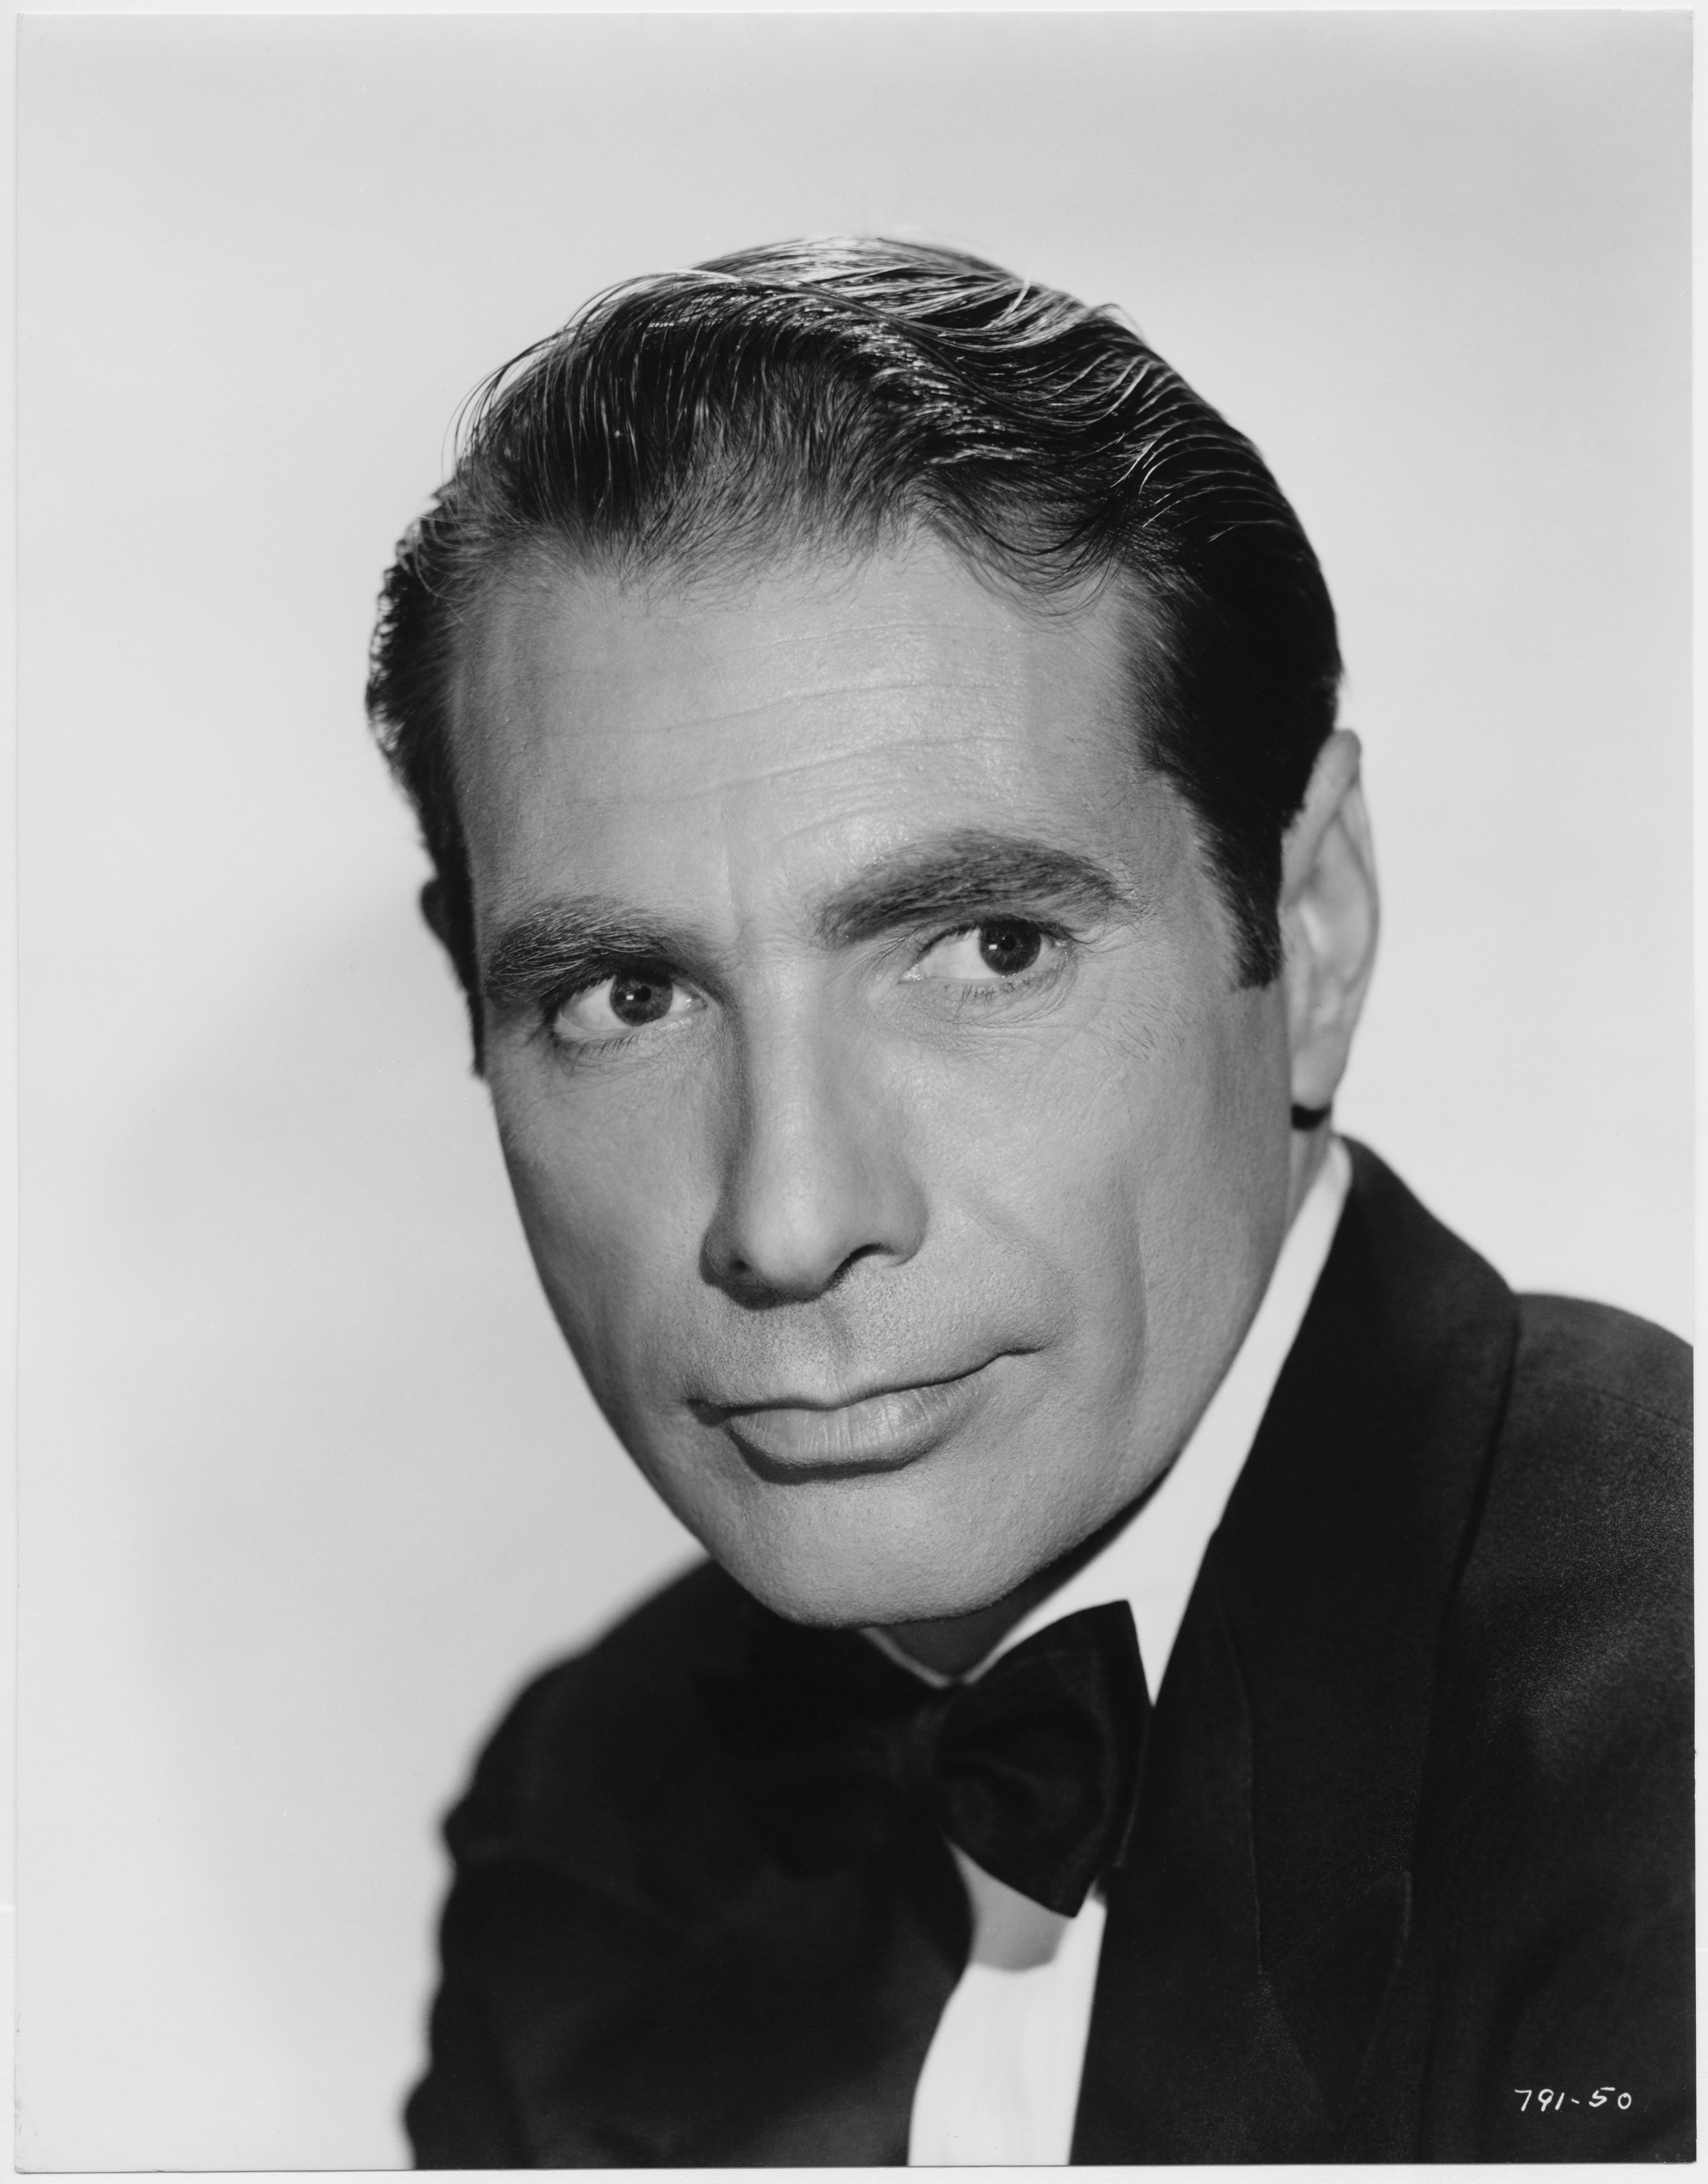 A portrait of 'All About Eve' actor Gary Merrill